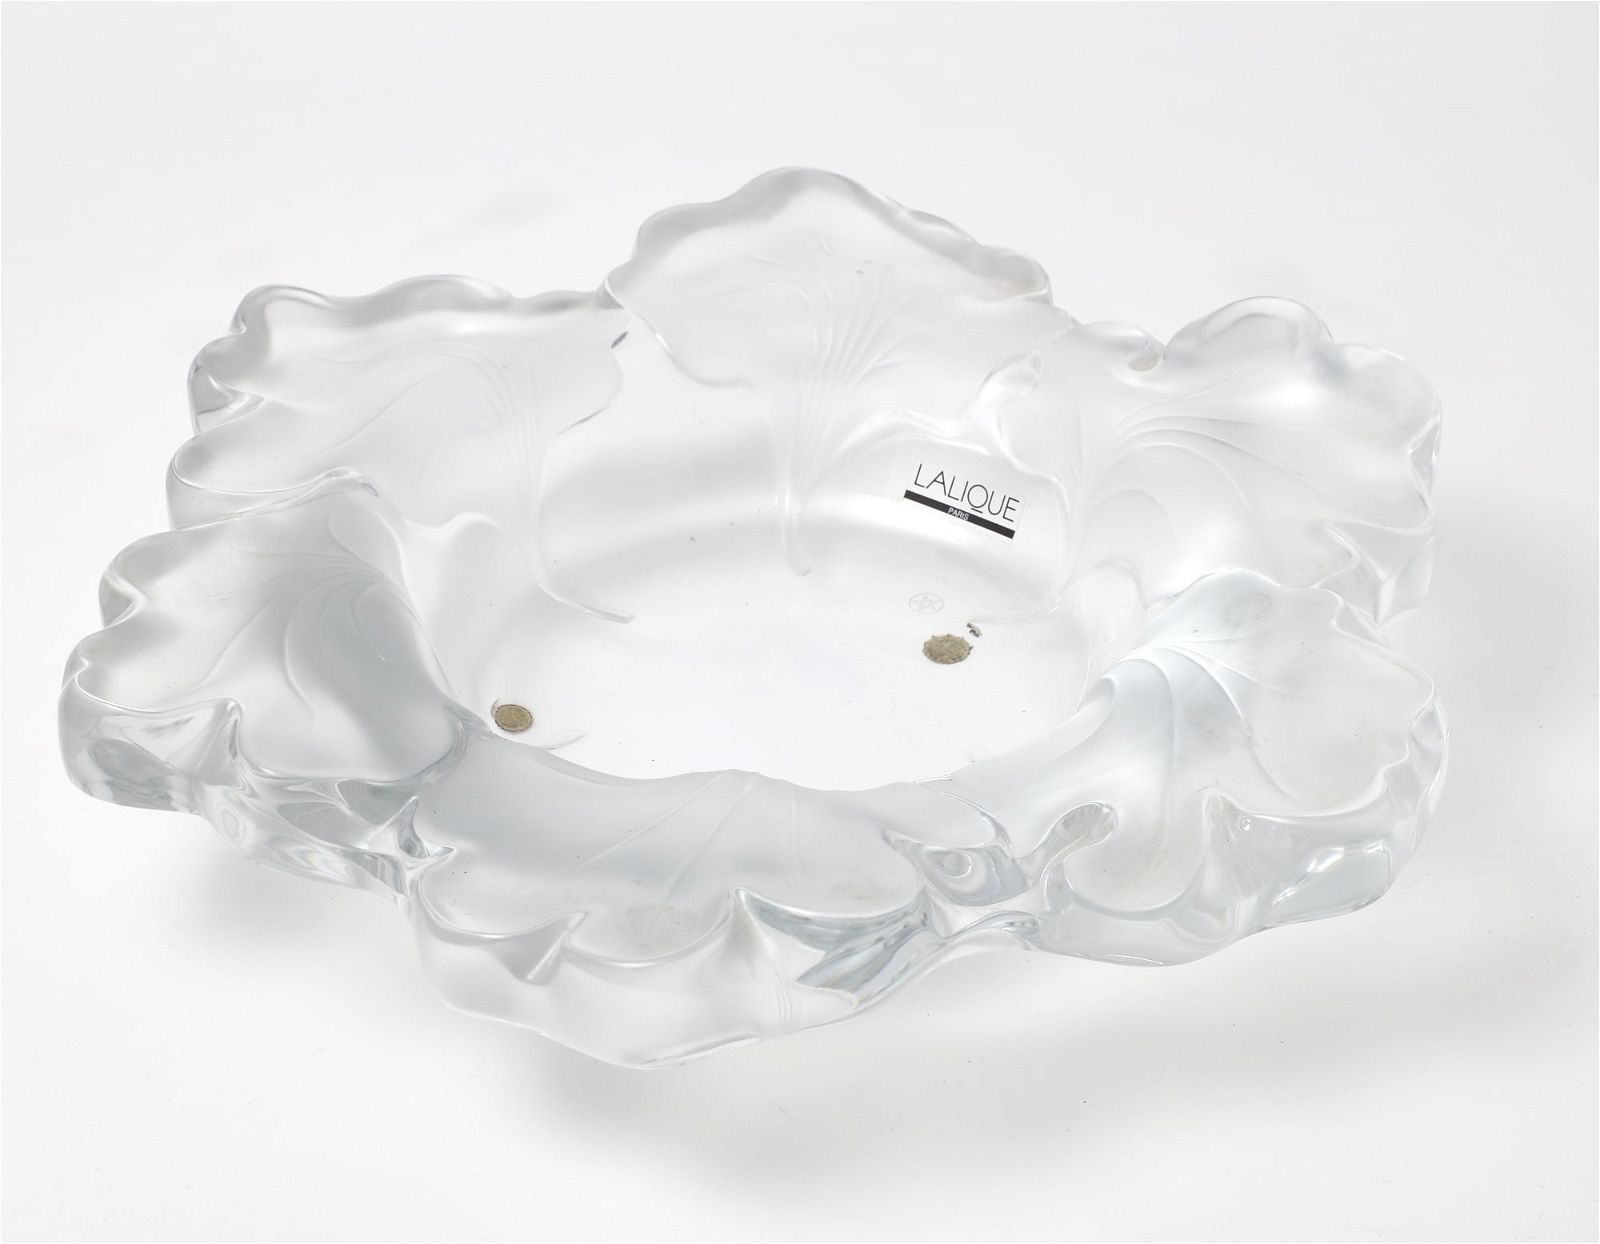 A LALIQUE FROSTED AND CLEAR GLASS